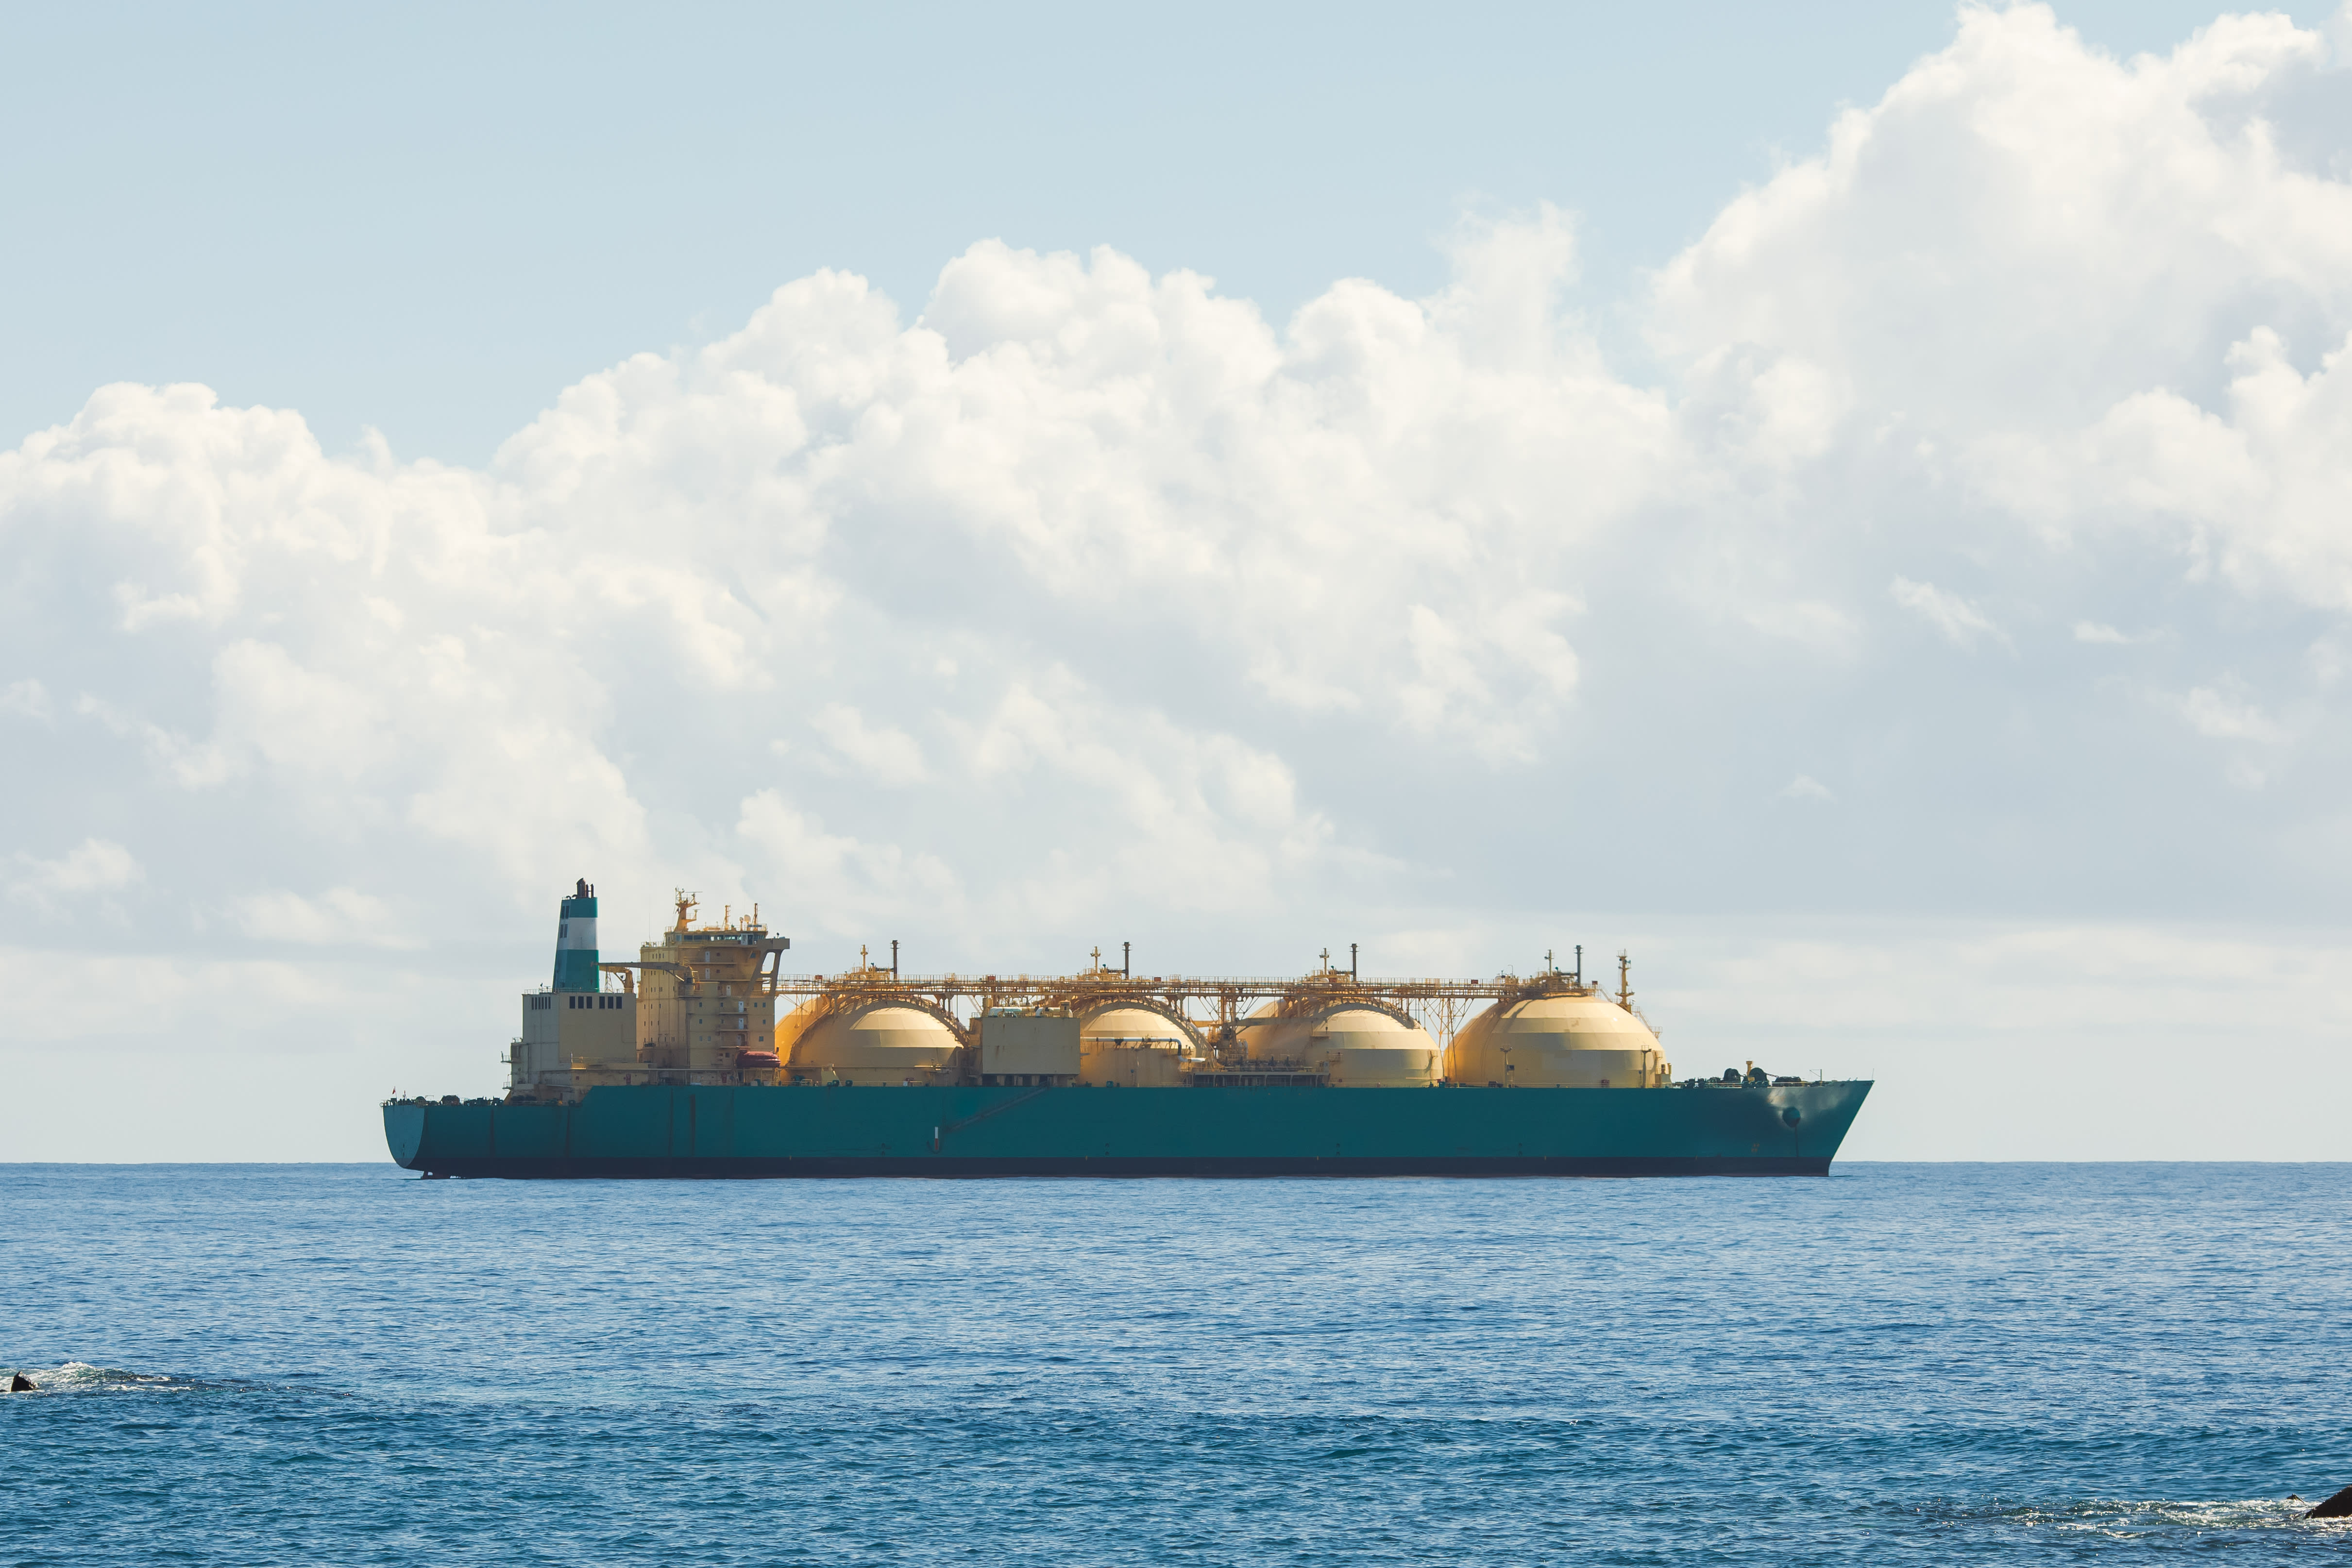 Demand for liquefied natural gas set to double by 2040, according to Shell